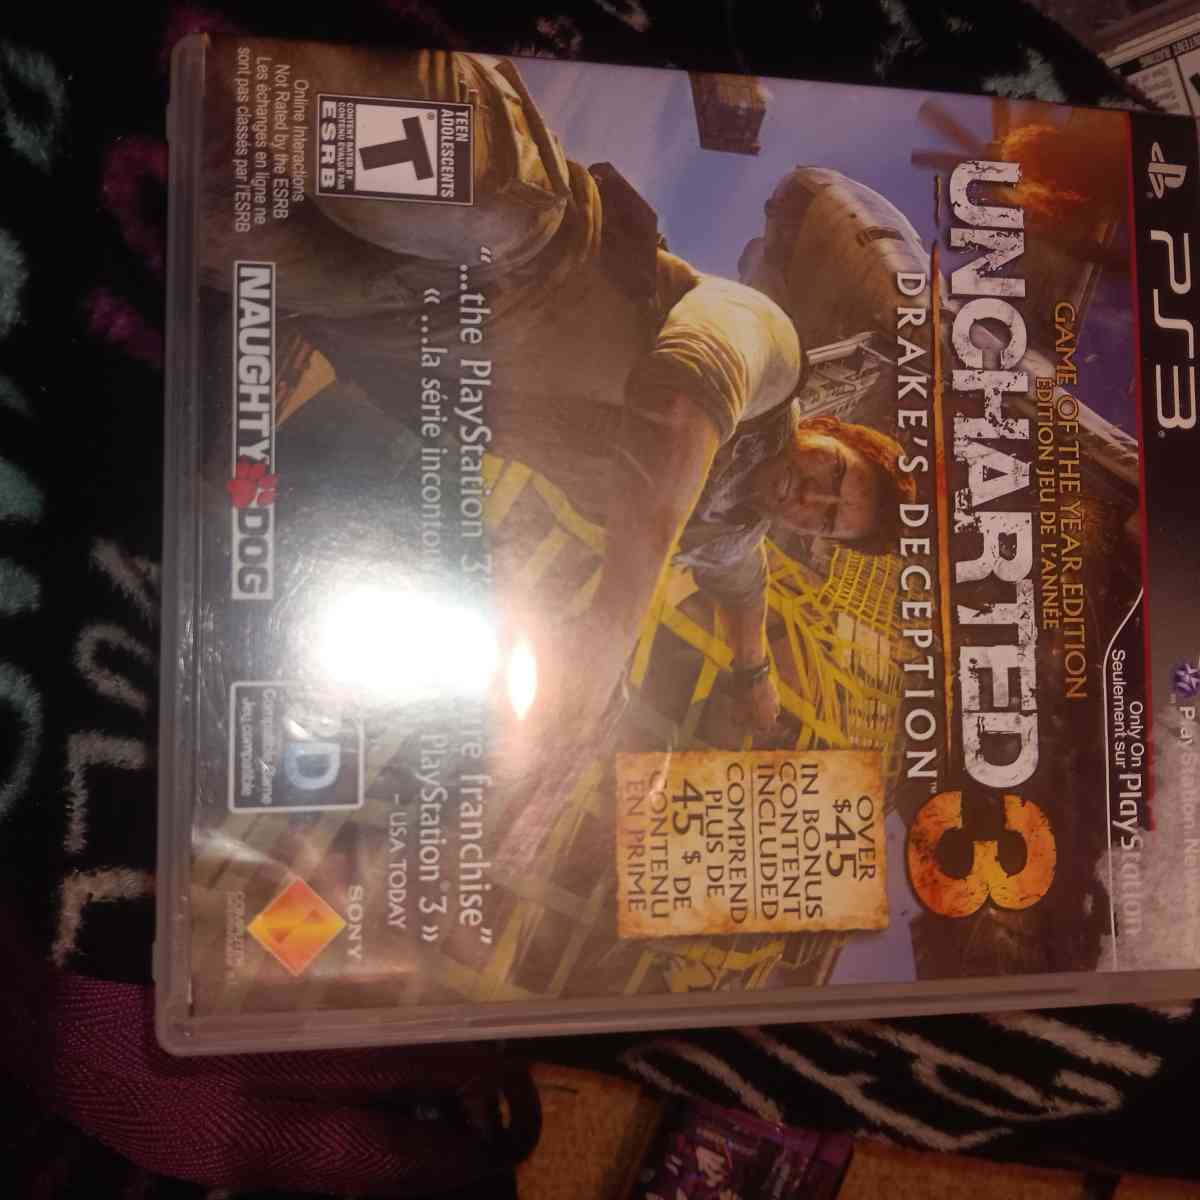 UNCHARTED 3 PS3 USED